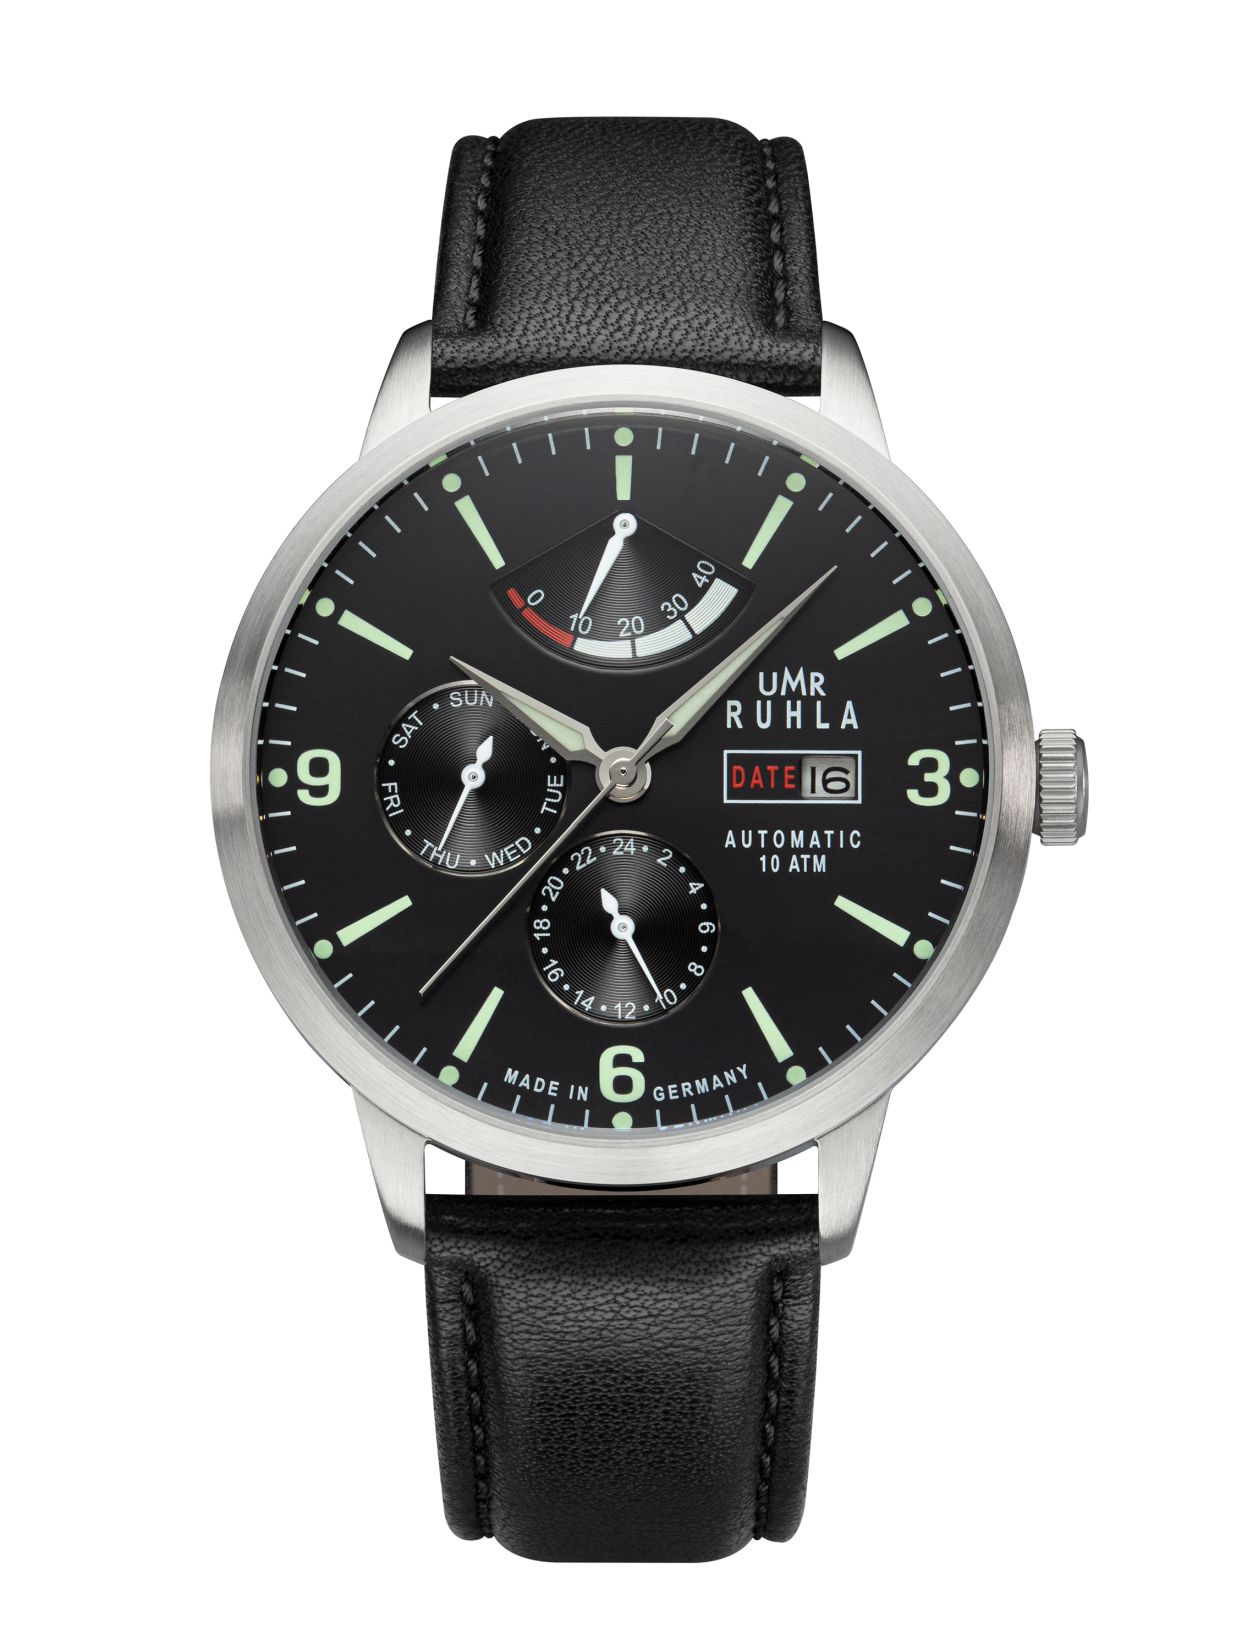 Uhren Manufaktur Ruhla - automatic watch with power reserve - black - made in Germany